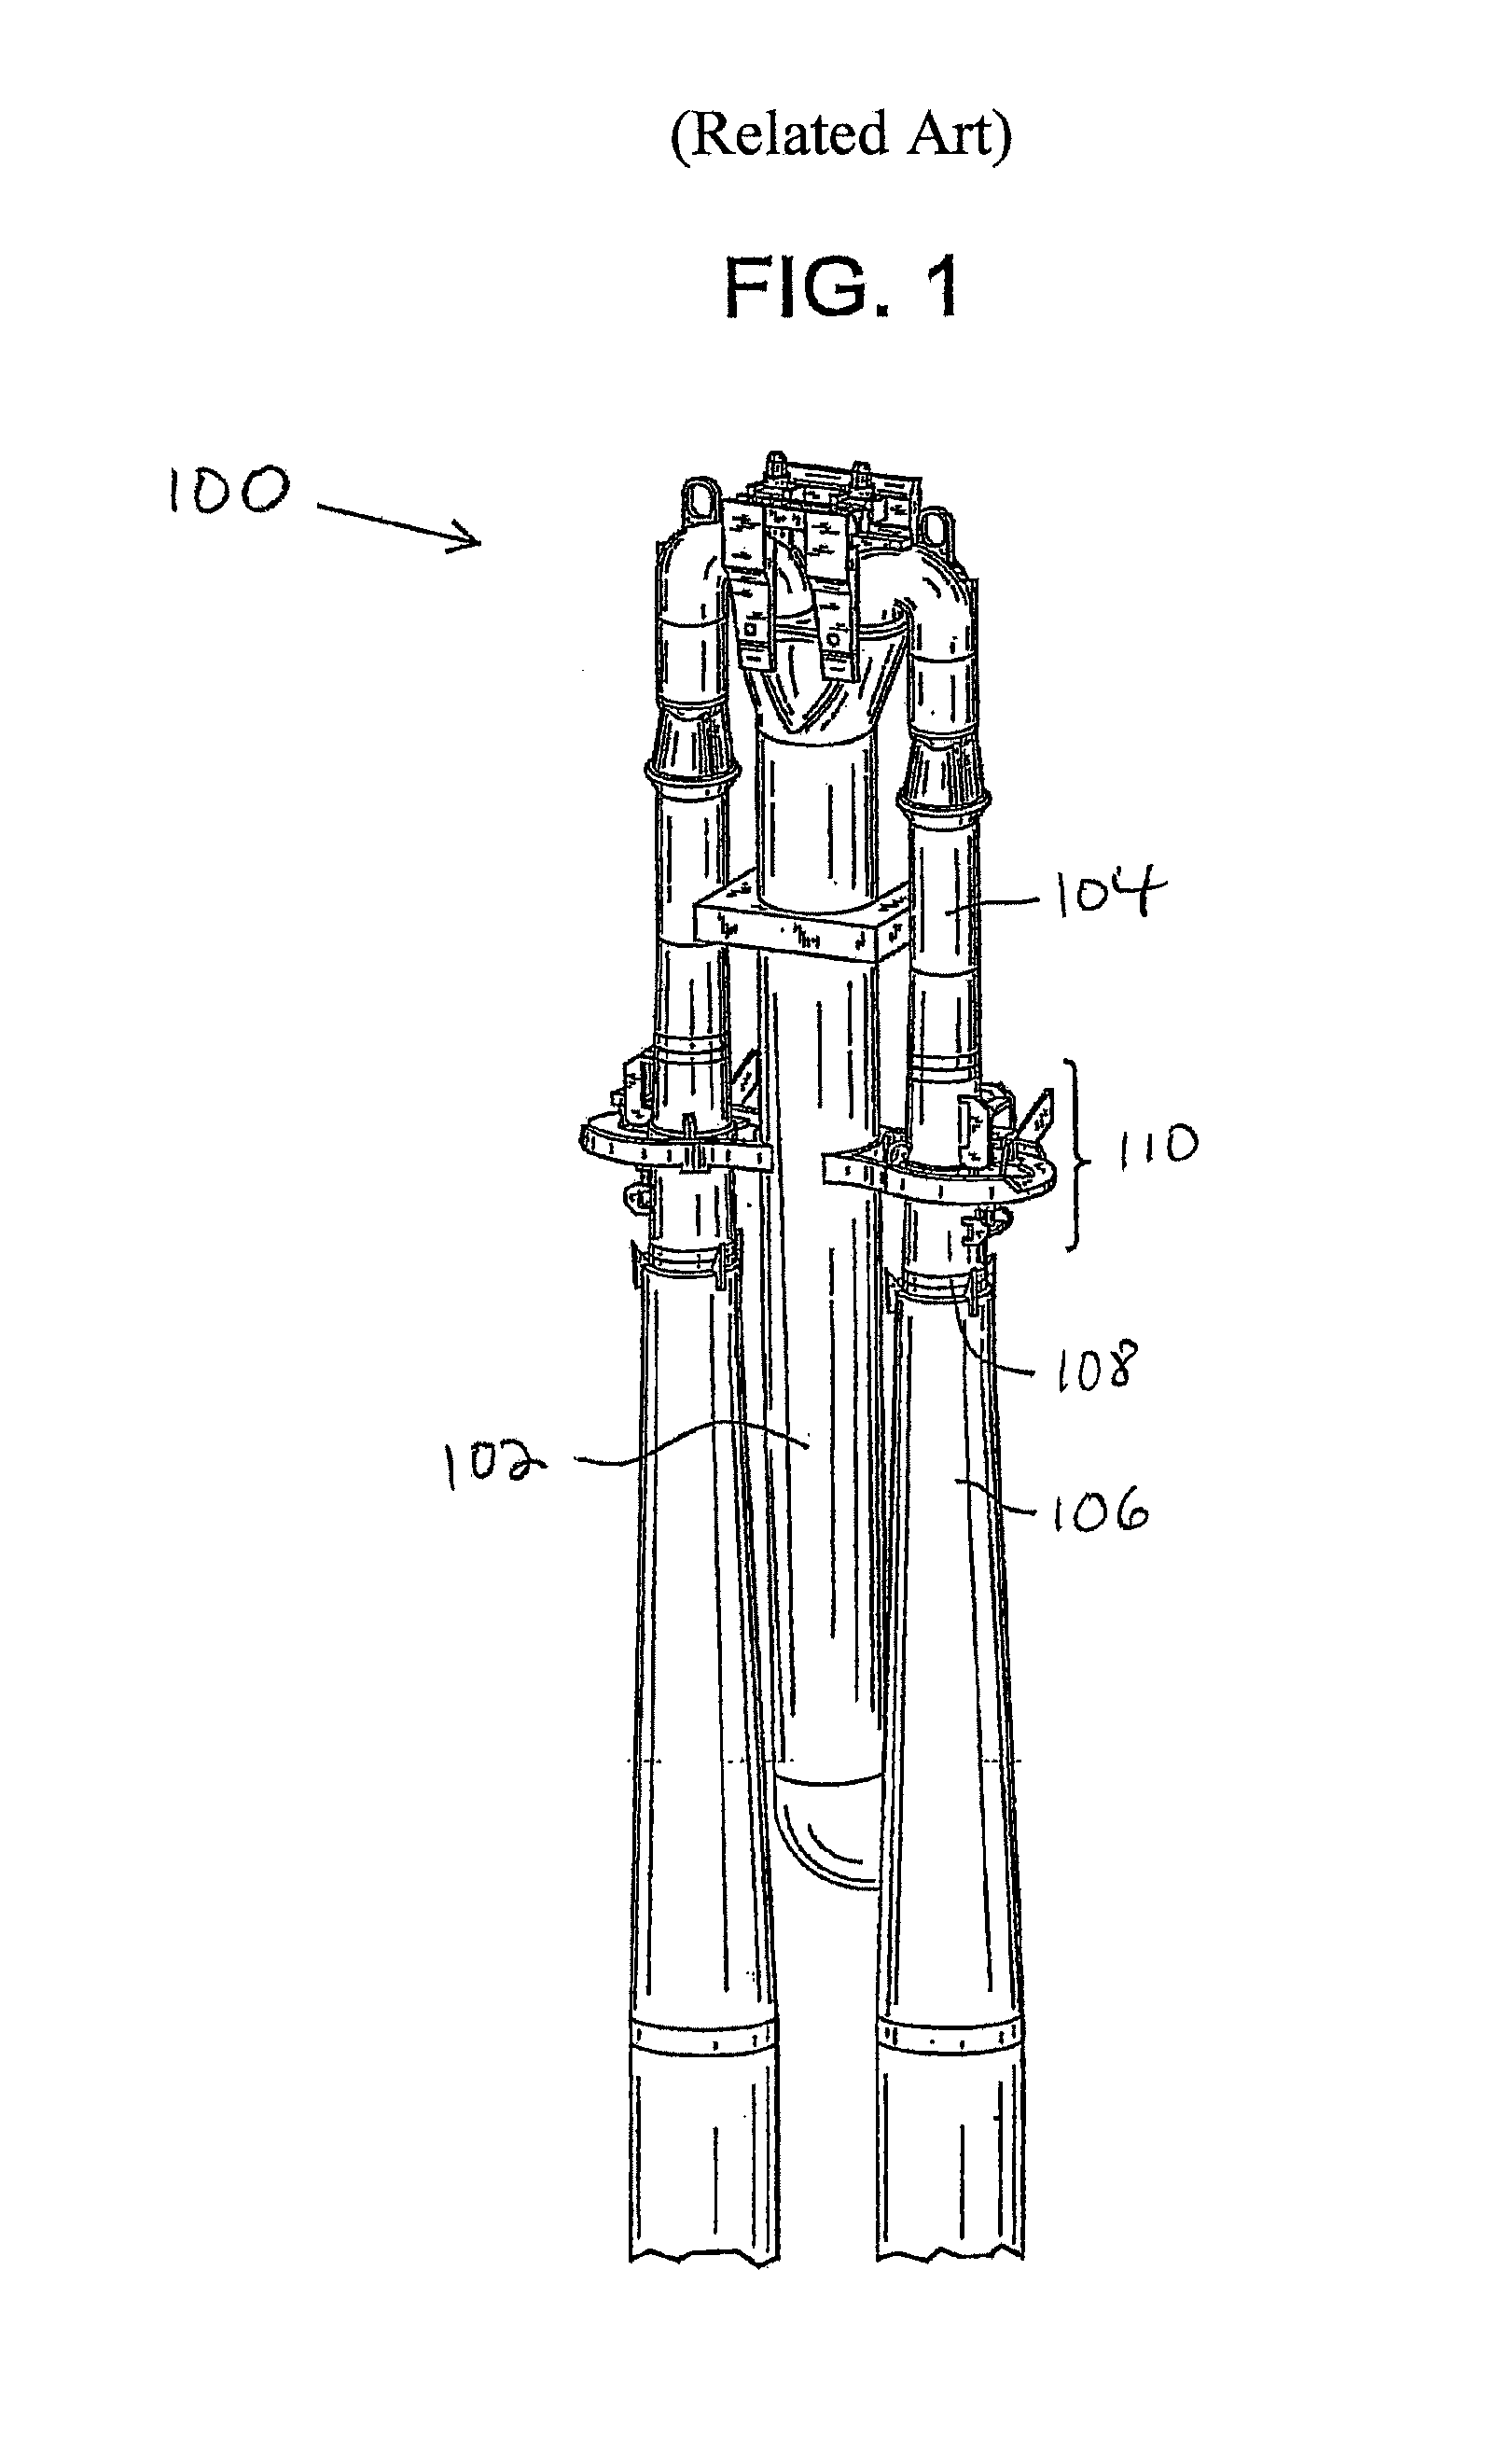 Apparatuses and methods for controlling movement of components